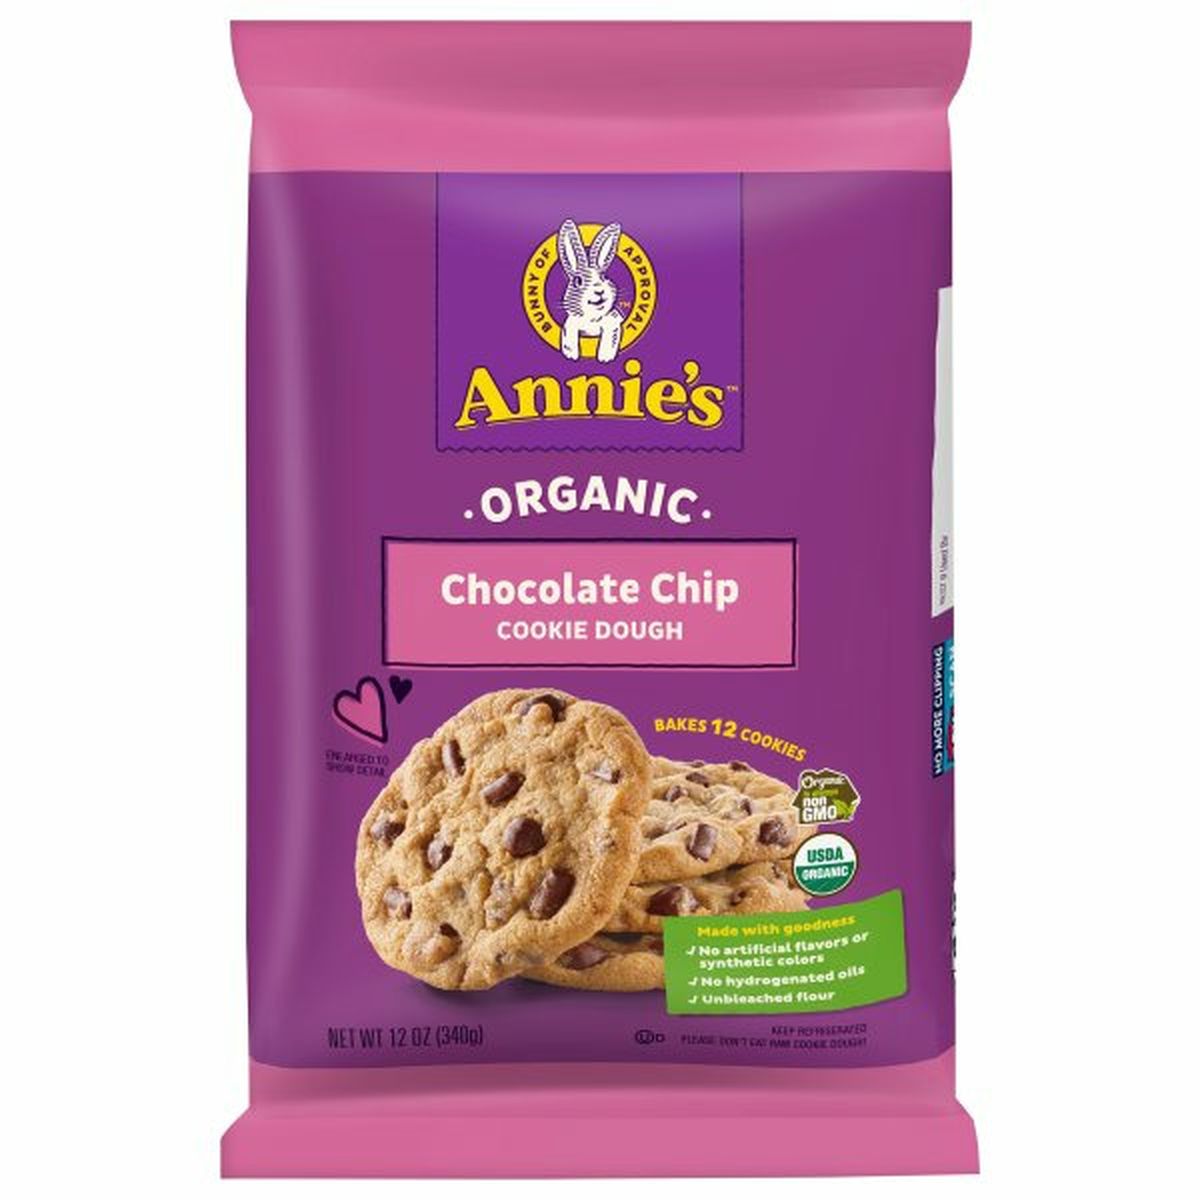 Calories in Annie's Cookie Dough, Organic, Chocolate Chip